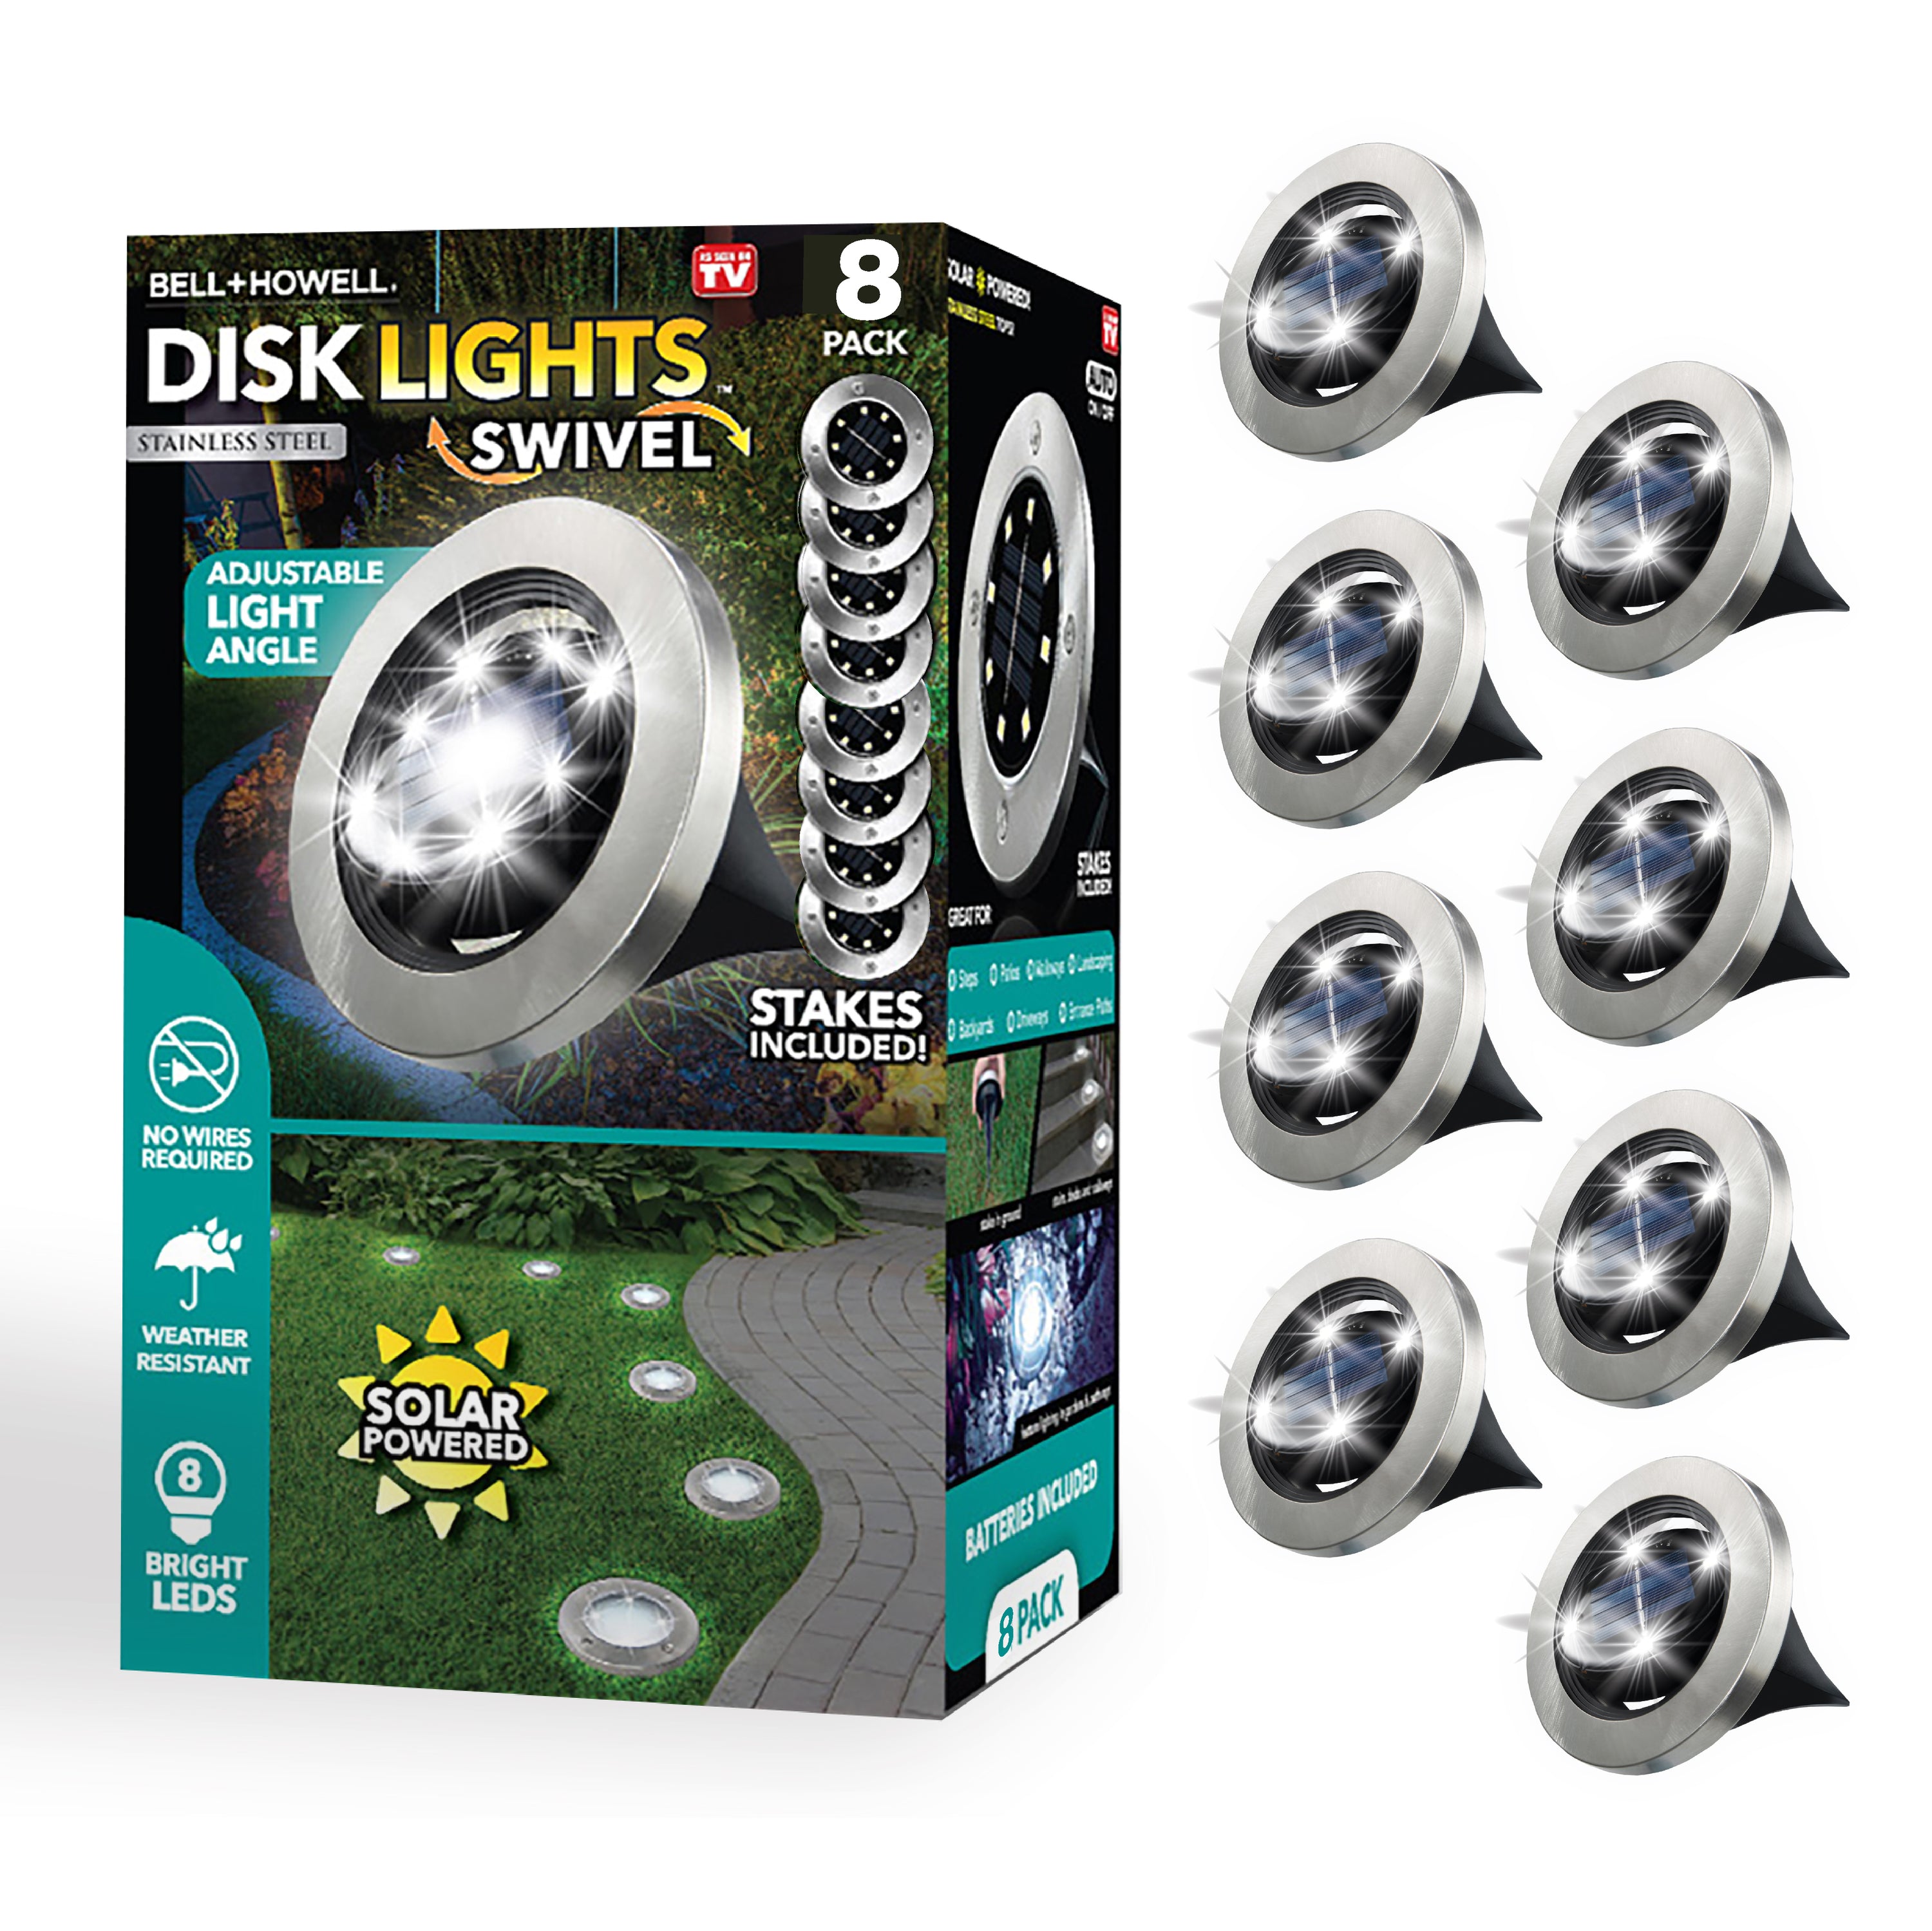 Bell + Howell Pathway & Landscape Disk Lights Stainless Steel - 8 Pack